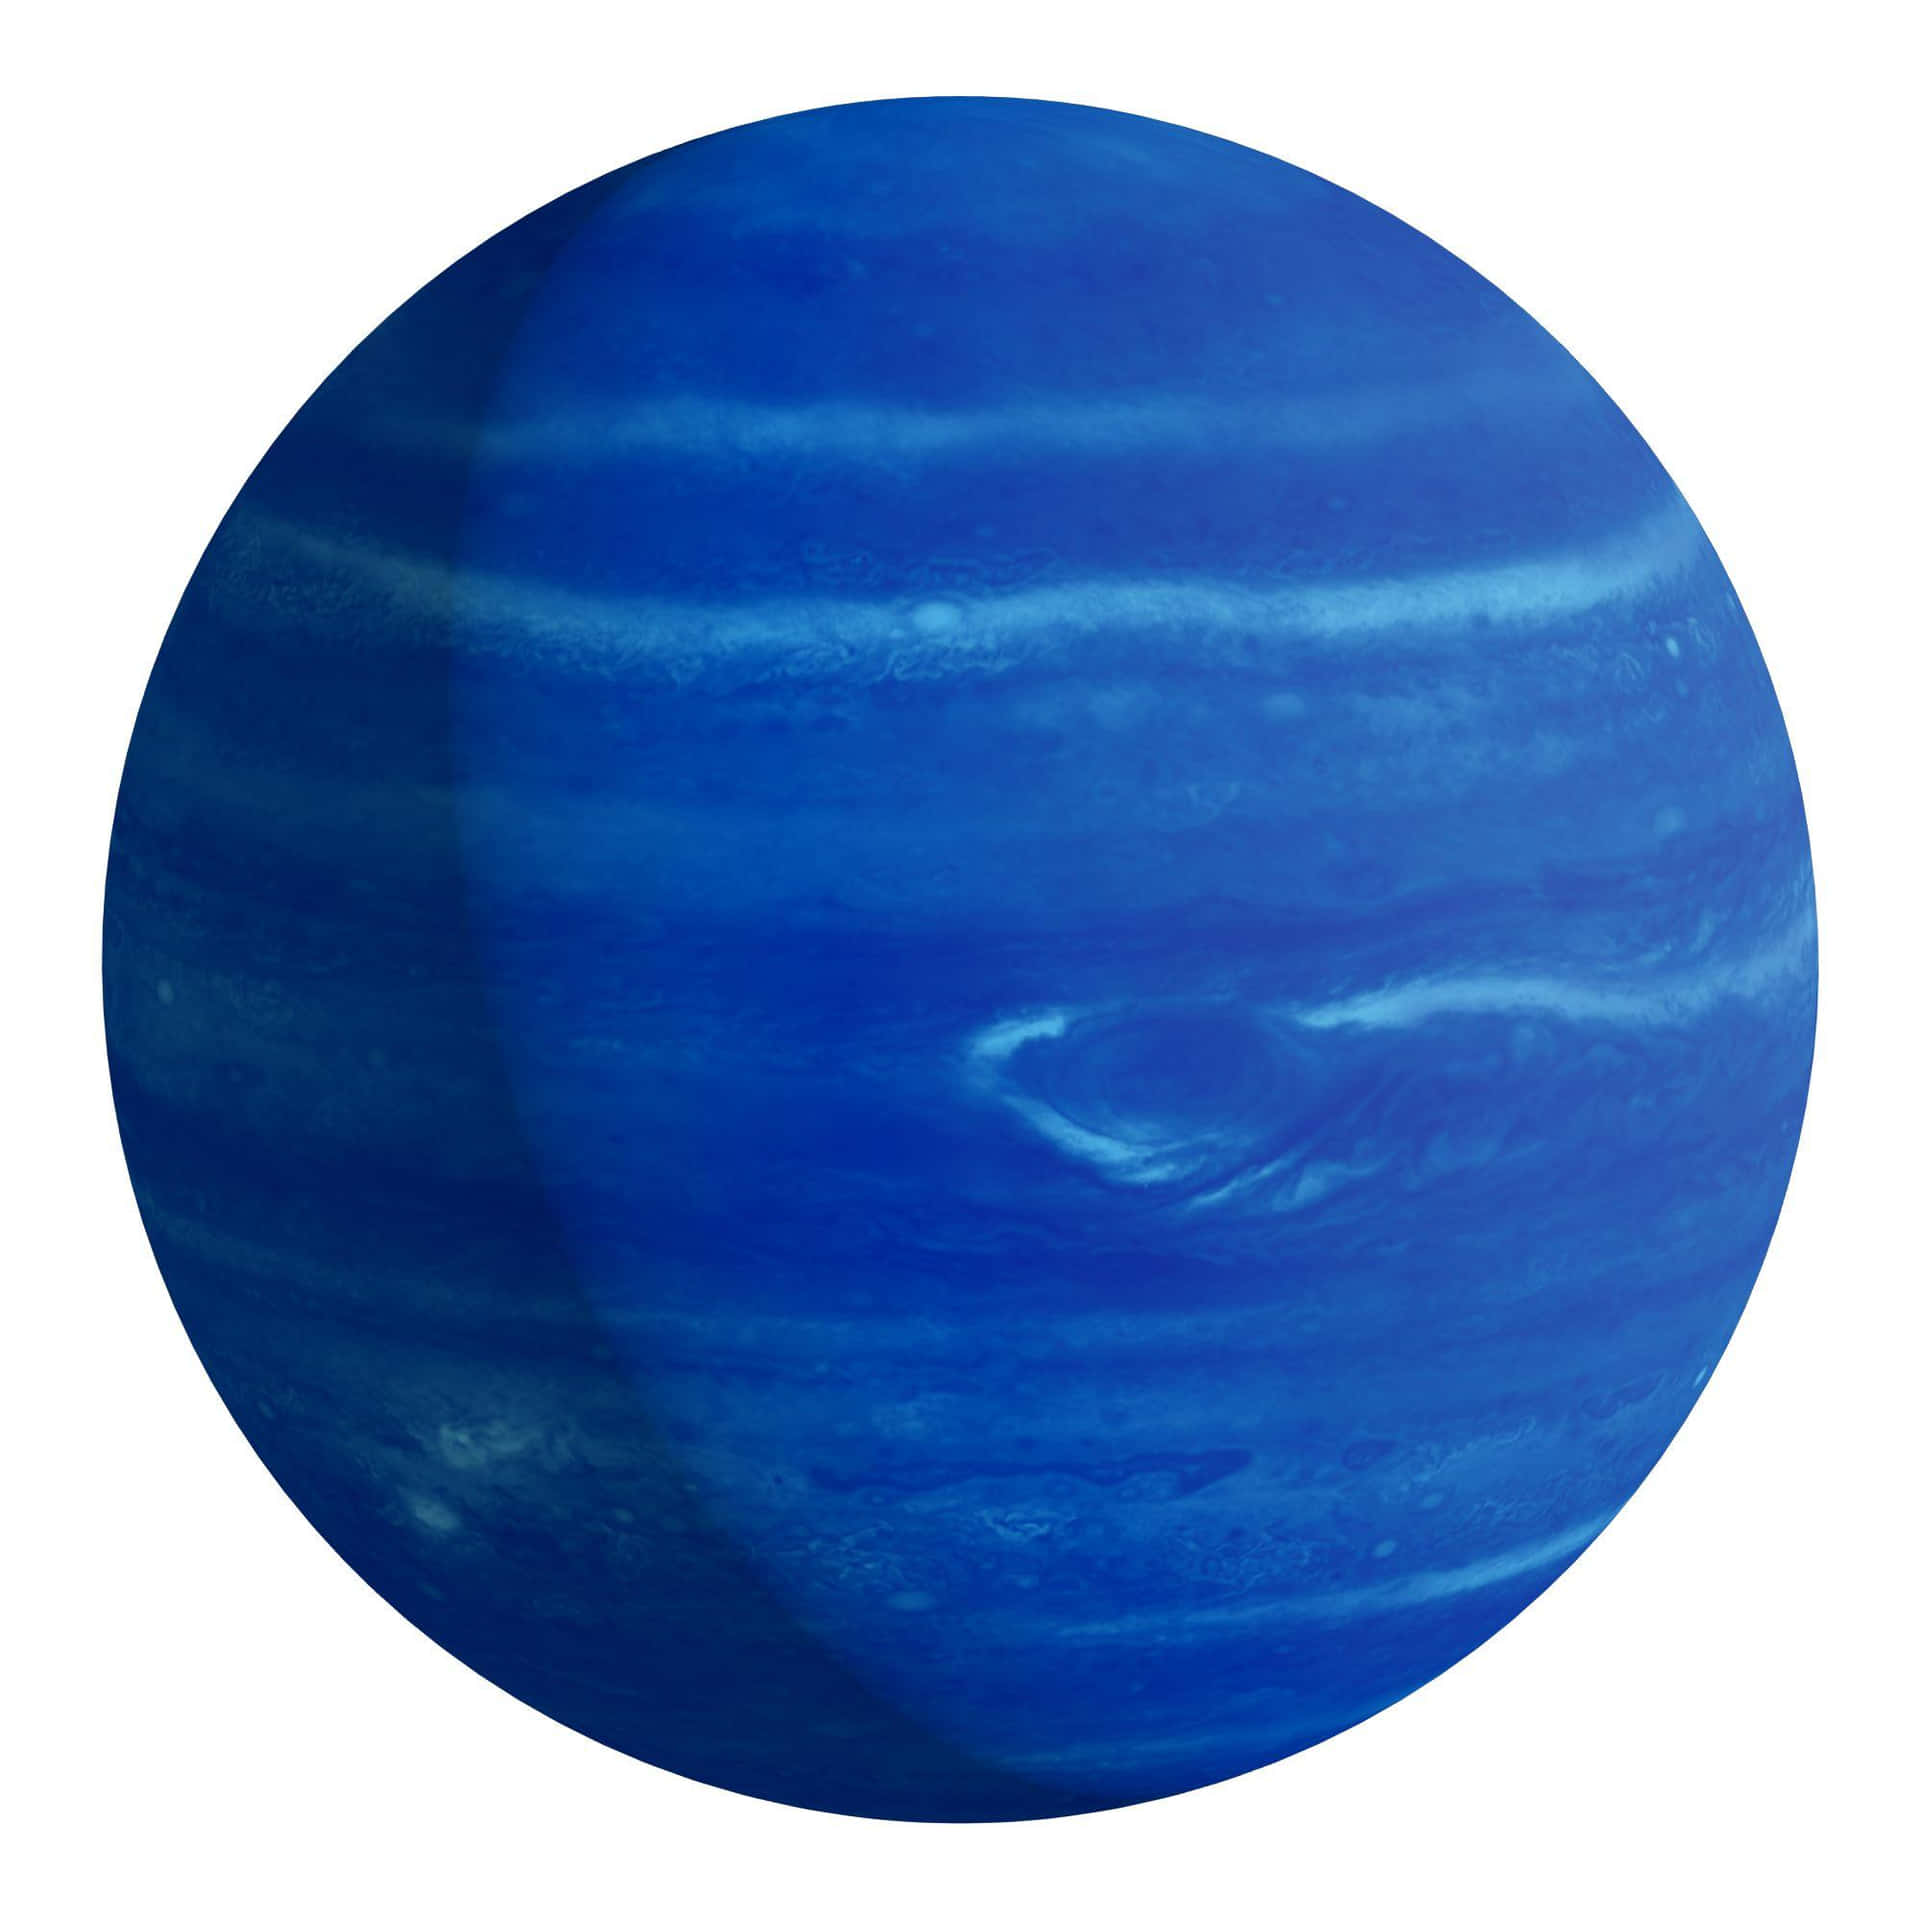 The icy planet of Neptune seen in this majestic image.